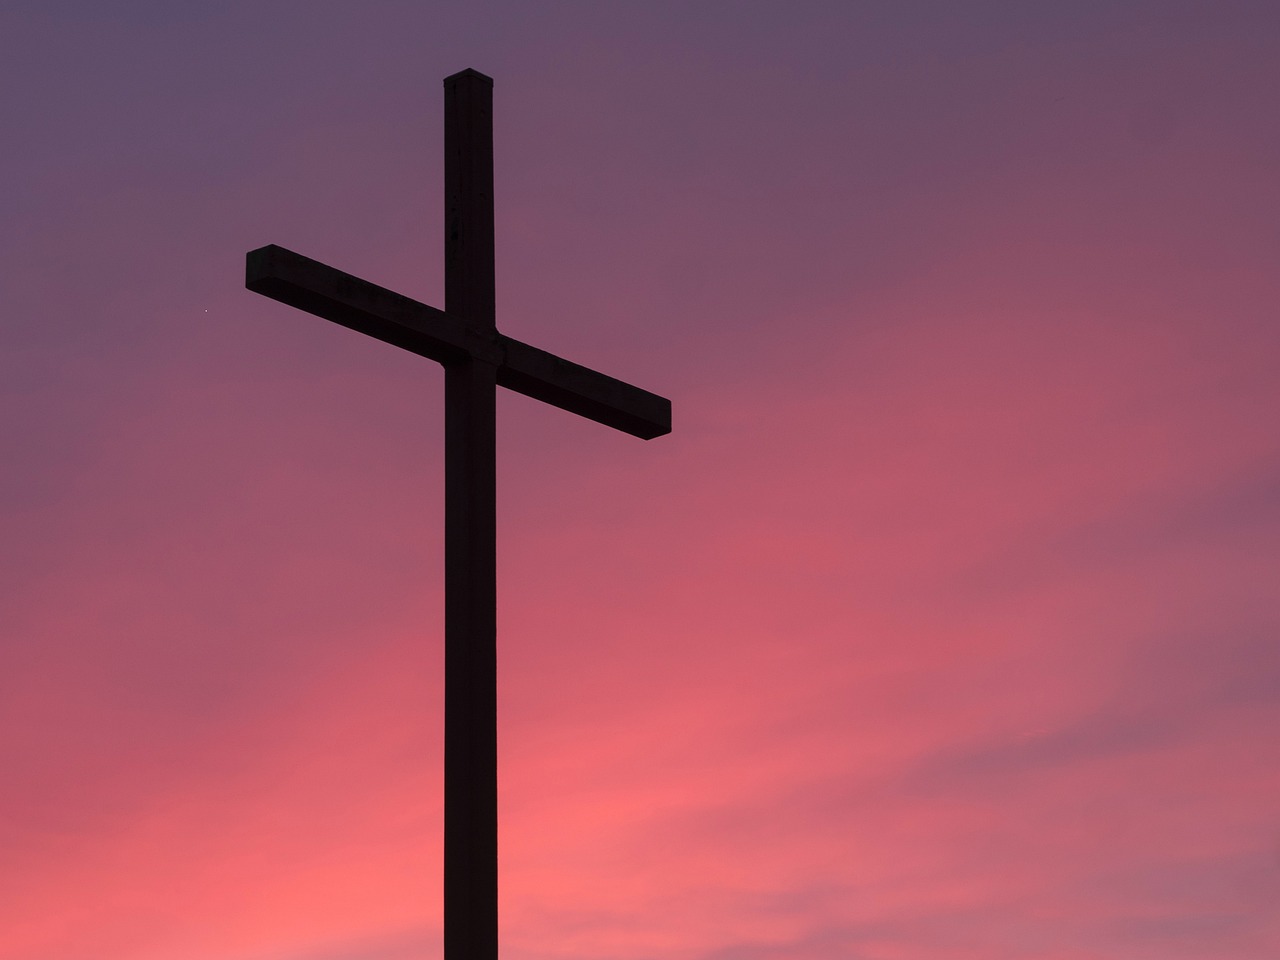 a cross on top of a hill at sunset, a picture, shutterstock, purple and red colors, full frame shot, 1128x191 resolution, stock photo